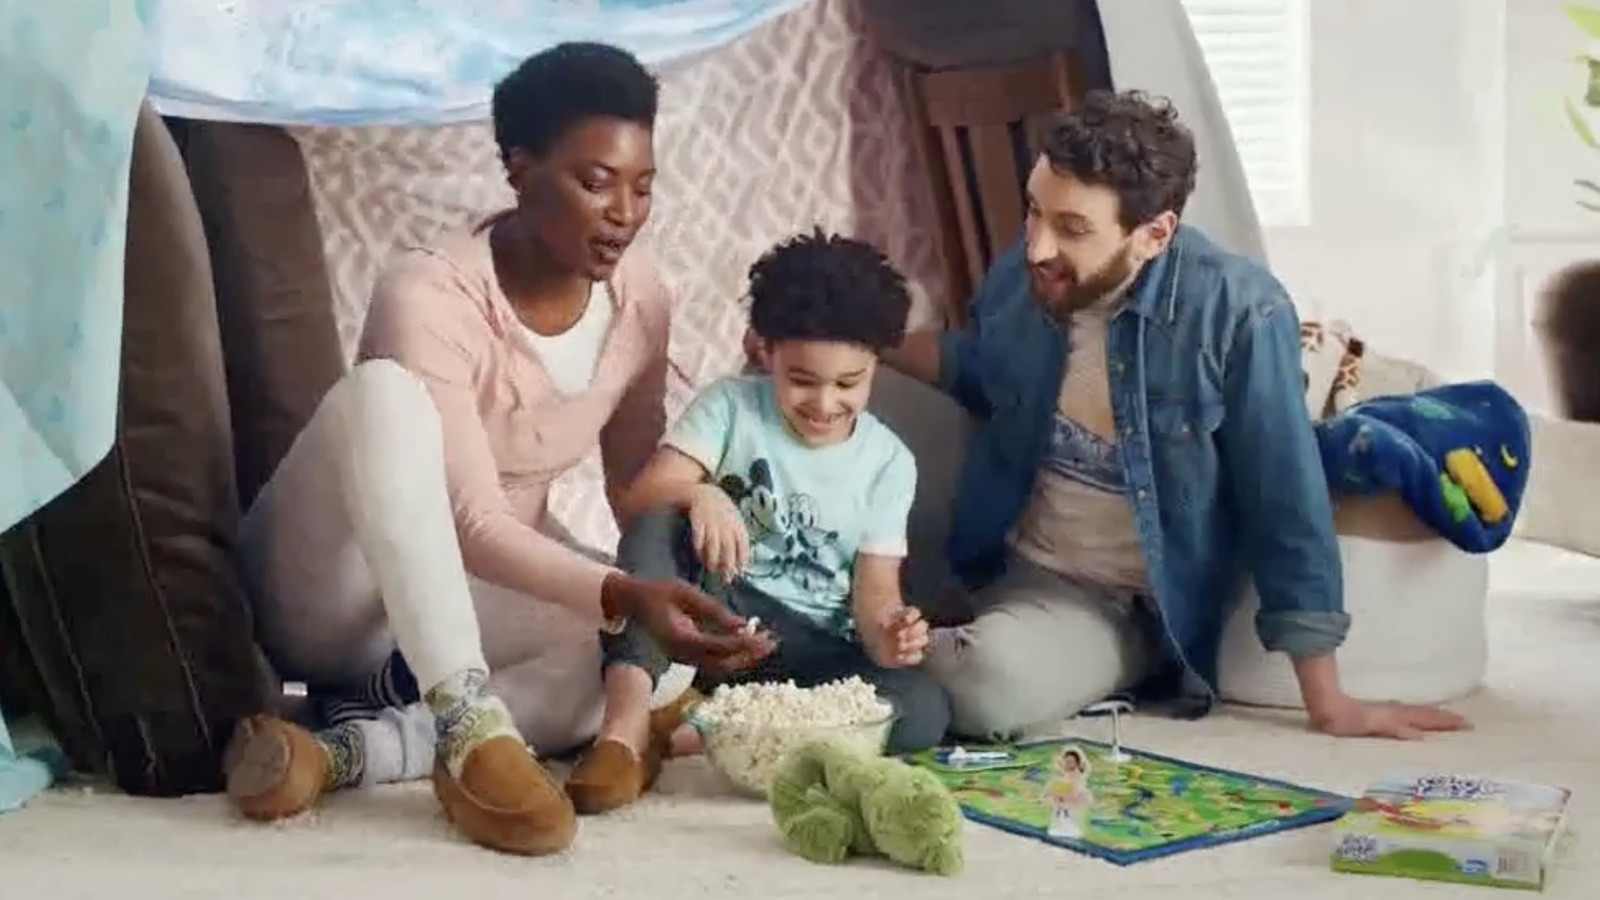 What Is The Song In The Kohl's 'Family Fun' Commercial?